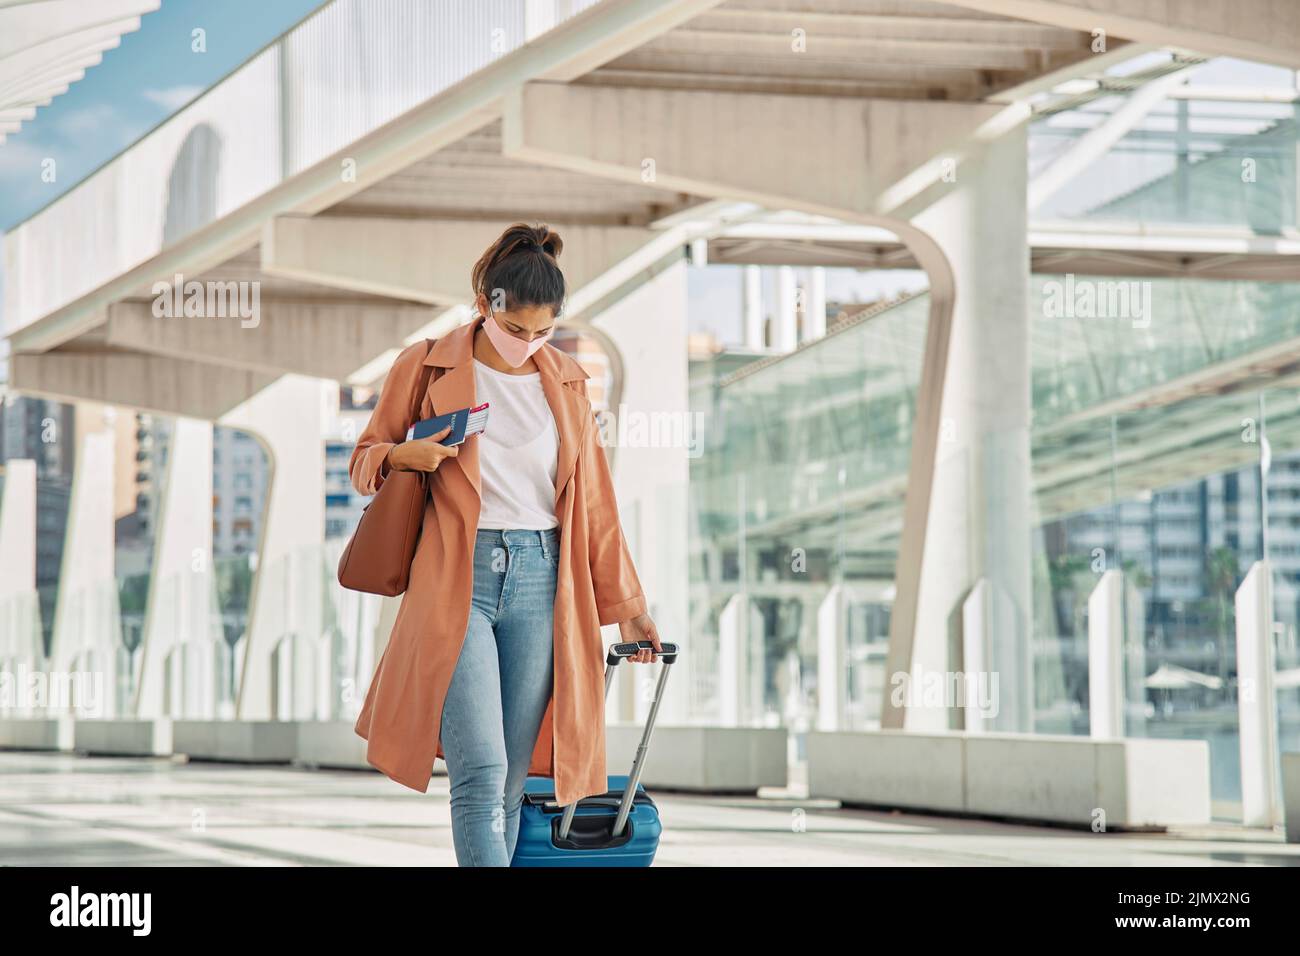 Woman Journey With Luxury Luggage In The Airport Travel Concept Stock Photo  - Download Image Now - iStock